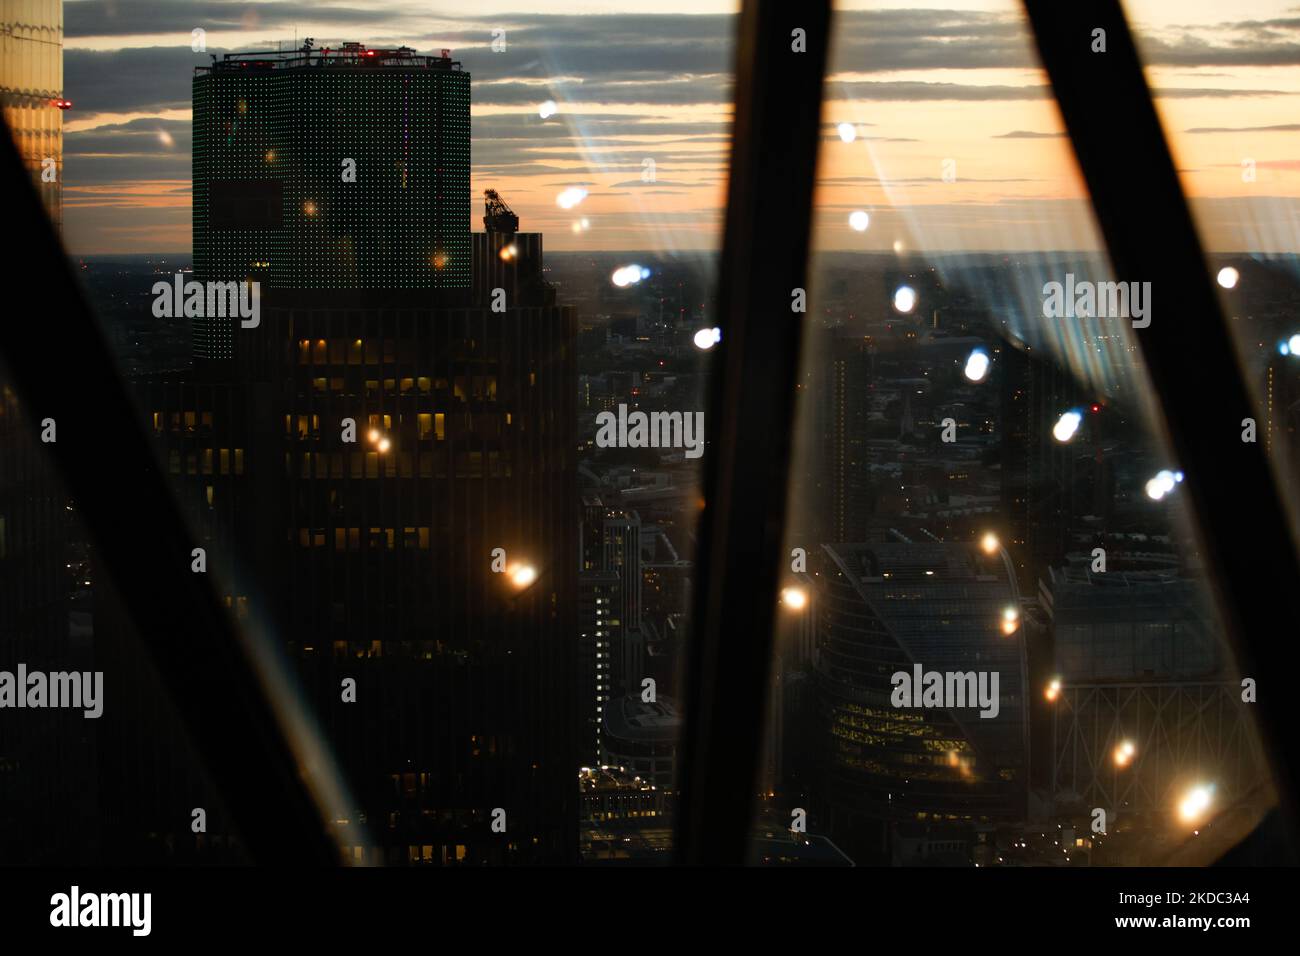 The Tower 42 skyscraper stands in the City of London financial district, seen through windows at the top of the 30 St Mary Axe tower, commonly known as The Gherkin, at sunset in London, England, on June 12, 2022. (Photo by David Cliff/NurPhoto) Stock Photo